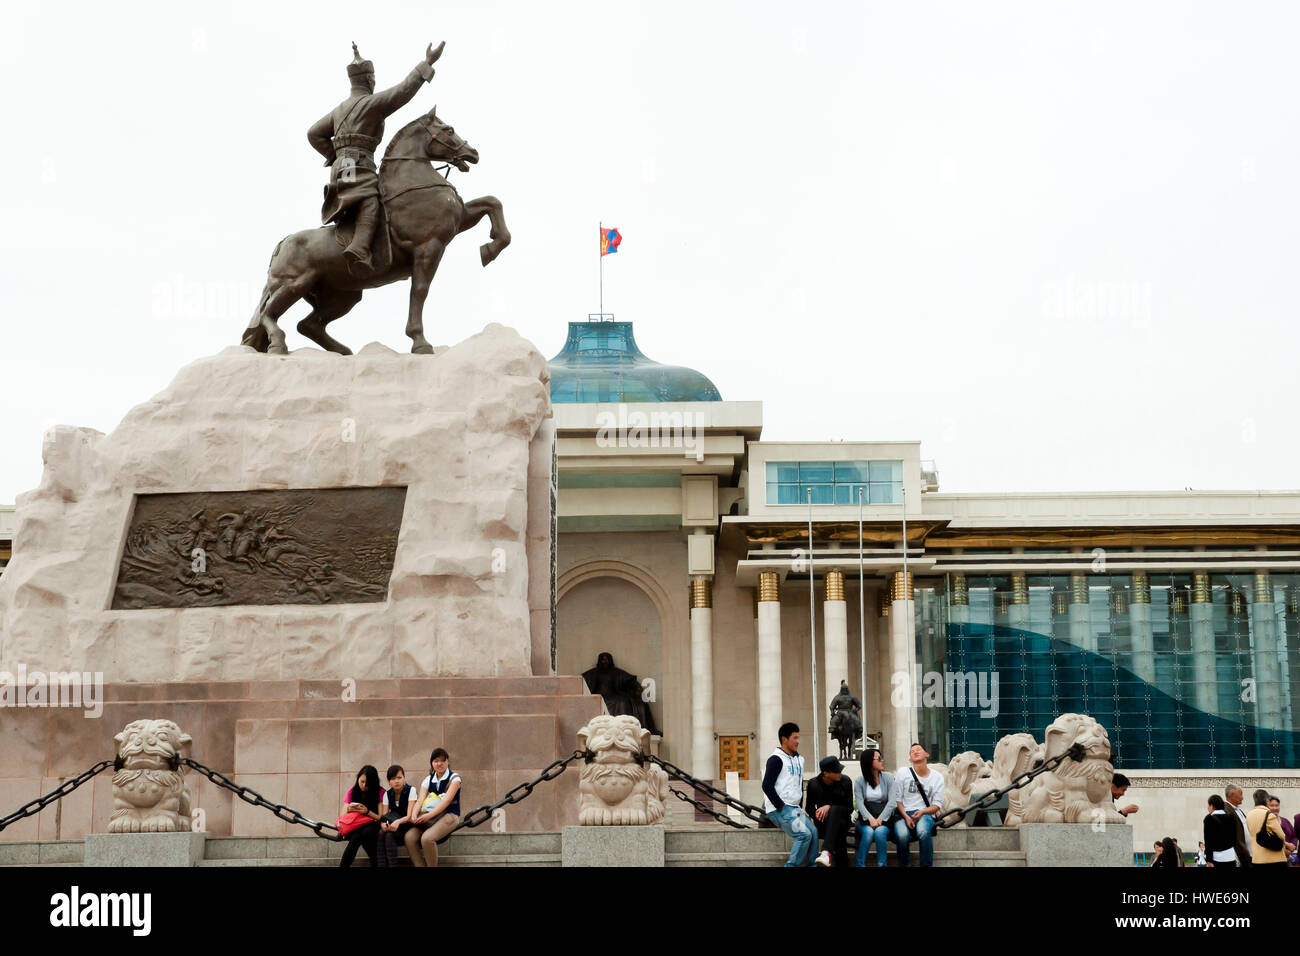 ULAANBAATAR, MONGOLIA - May 10, 2012: Statue of Damdin Sukhbaatar; the founding member of the Mongolian People's Party Stock Photo